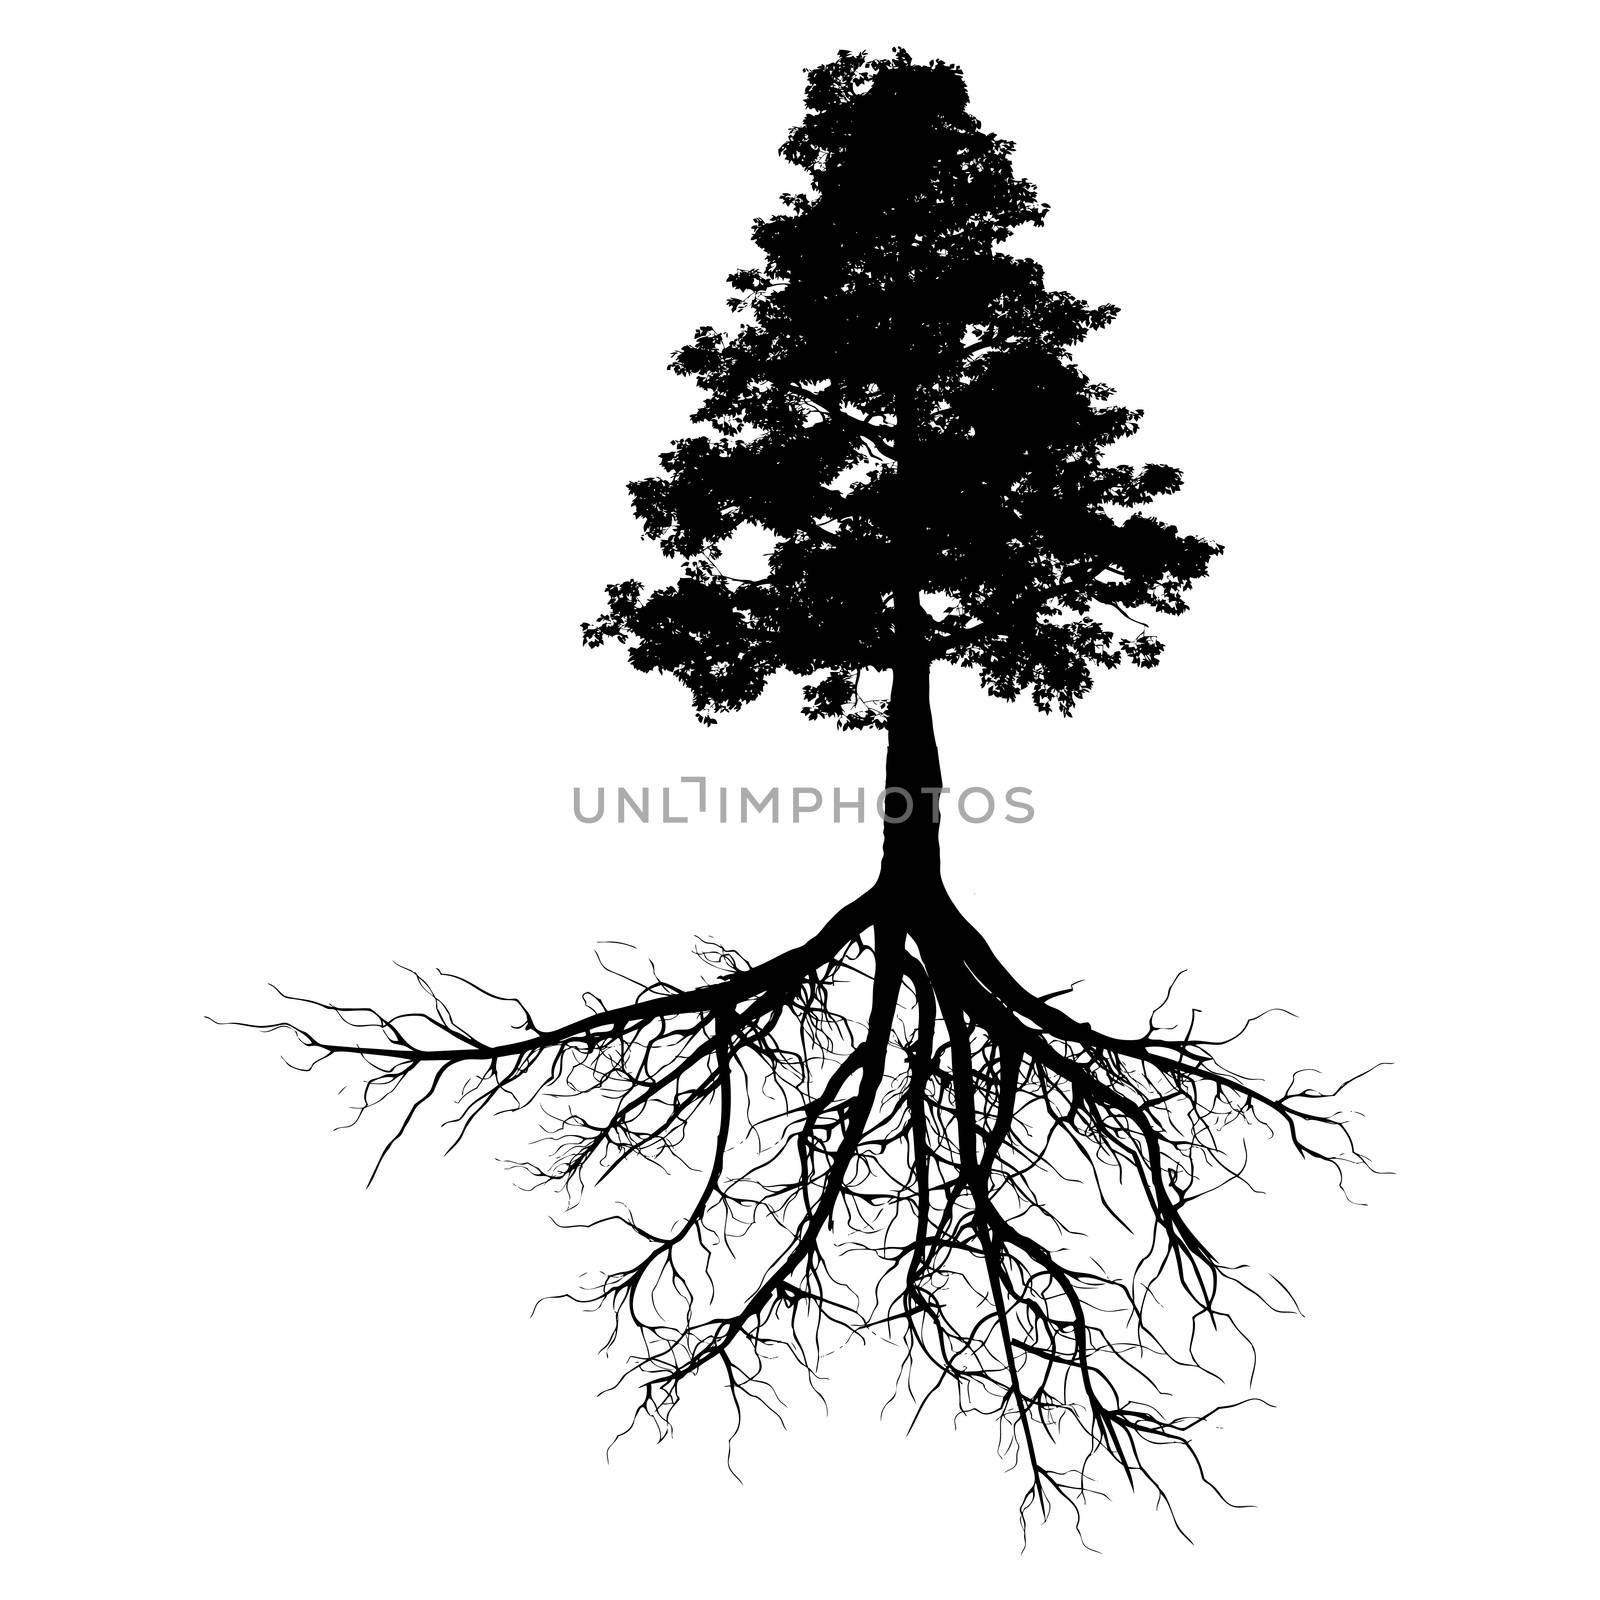 A black tree with roots isolated on a white background